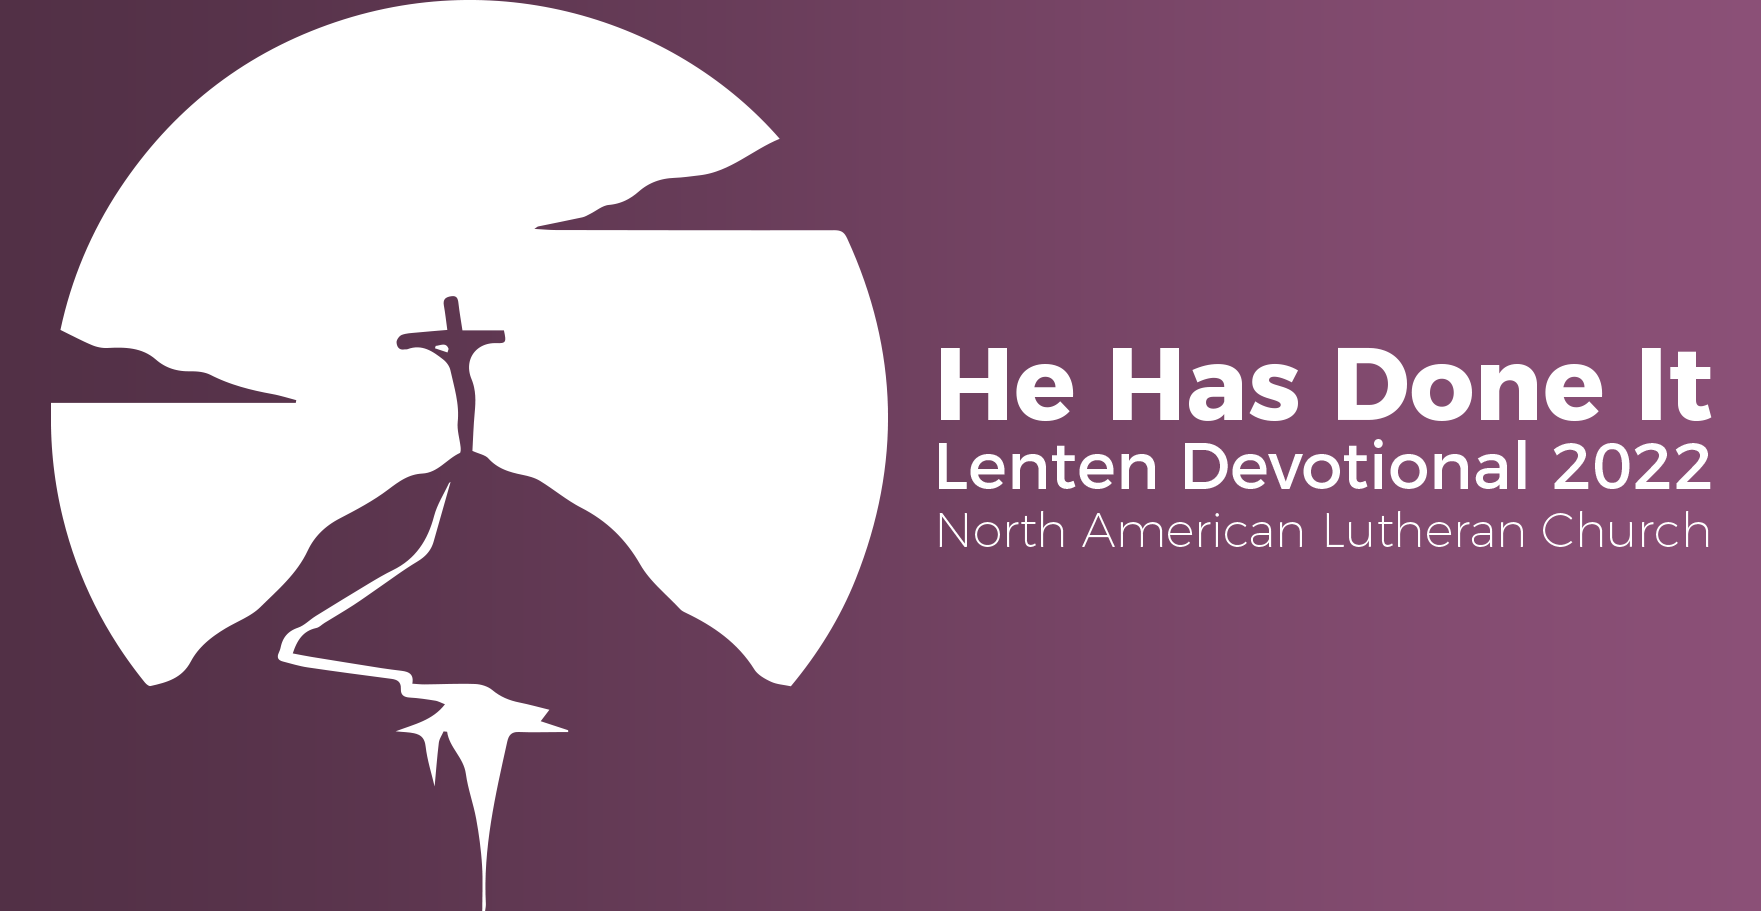 March 15, 2022 | Tuesday of the Week of Lent II